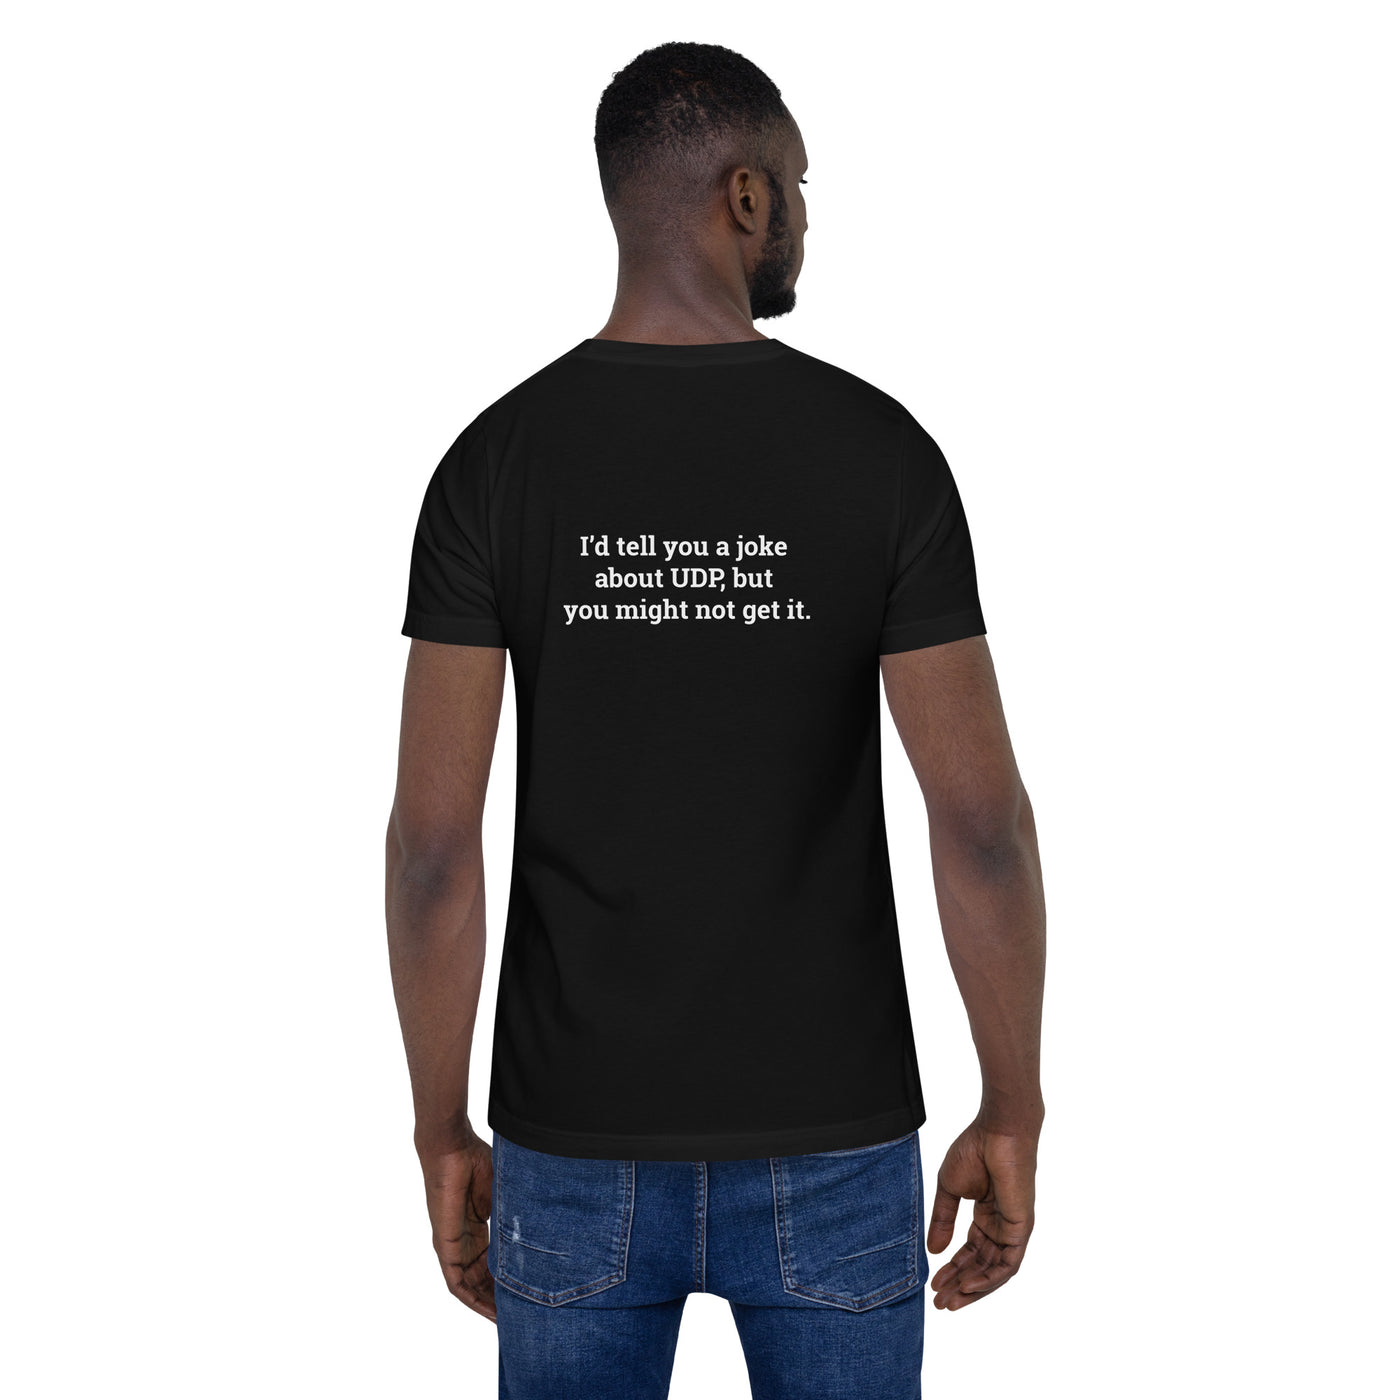 I'd tell you a joke about UDP,but you might not get it V1 - Unisex t-shirt